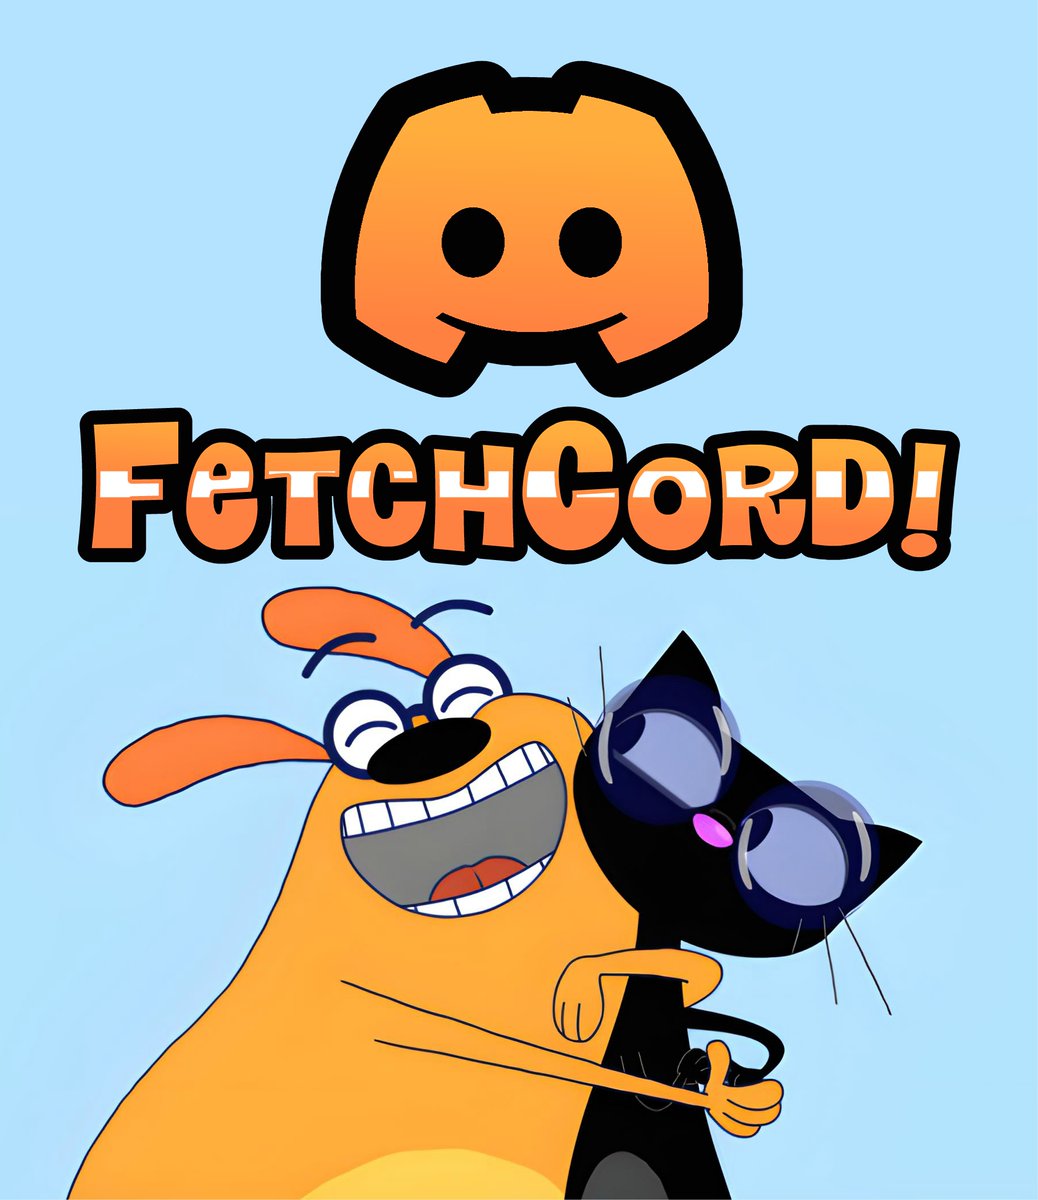 Calling all fans of Fetch With Ruff Ruffman! 🐶 Looking for a cozy corner of the internet to watch Ruff, share fanart, swap stories, and wag tails? Come join us on FetchCord, a Fan Discord Server for all things Ruff Ruffman! discord.gg/W6XTPcN37W #Fetch #RuffRuffman #PBSkids